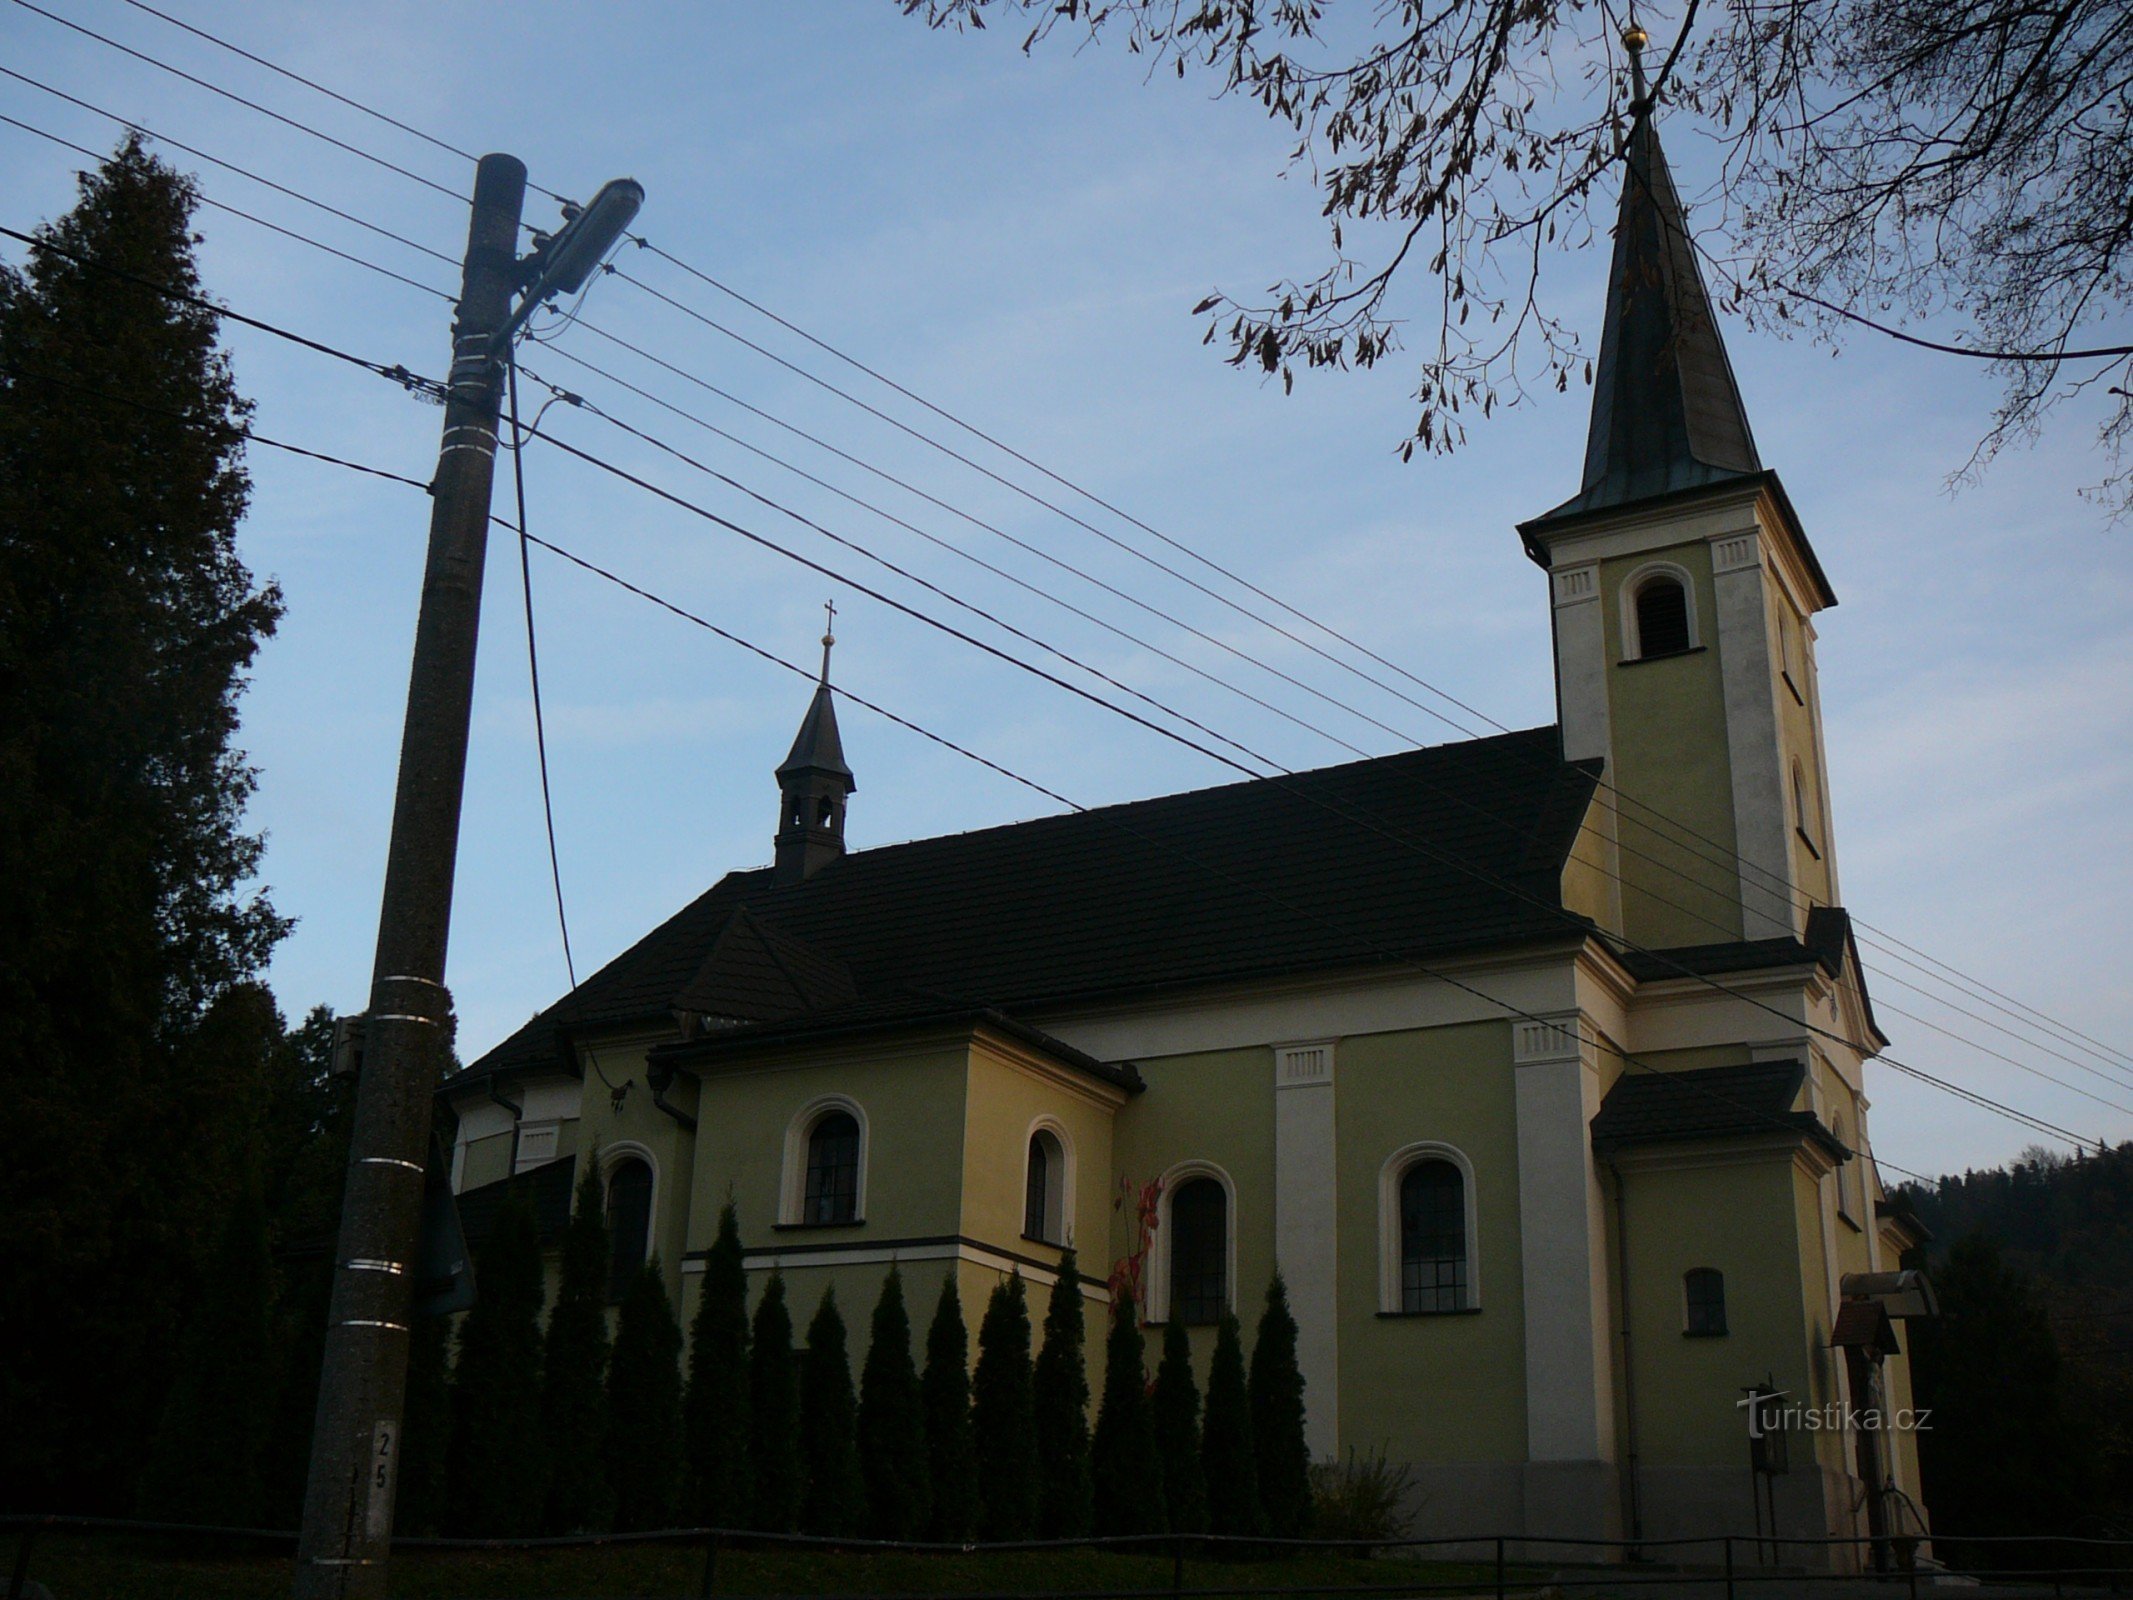 St. Cyrill und Methodius in Chlebovice